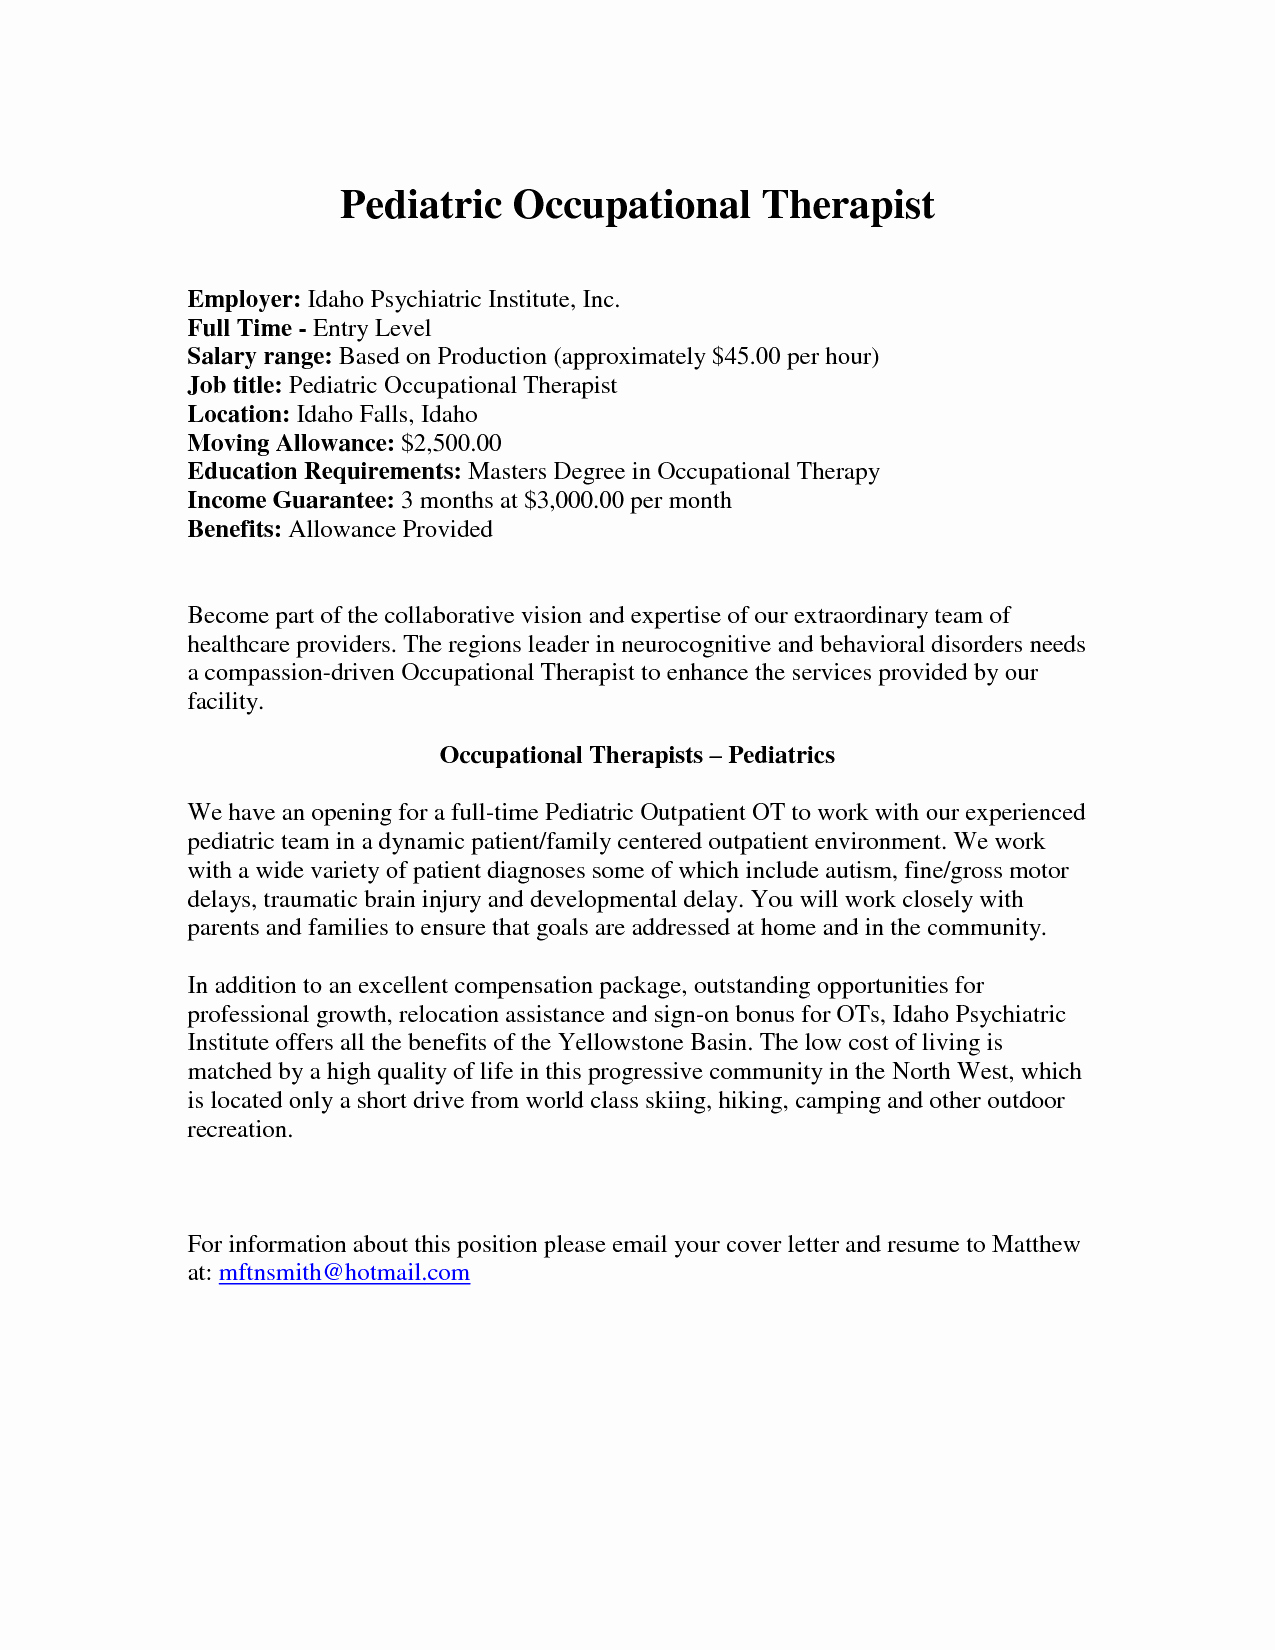 Respiratory therapy Cover Letter Template - Pca Cover Letter Beautiful 20 Respiratory therapist Cover Letter